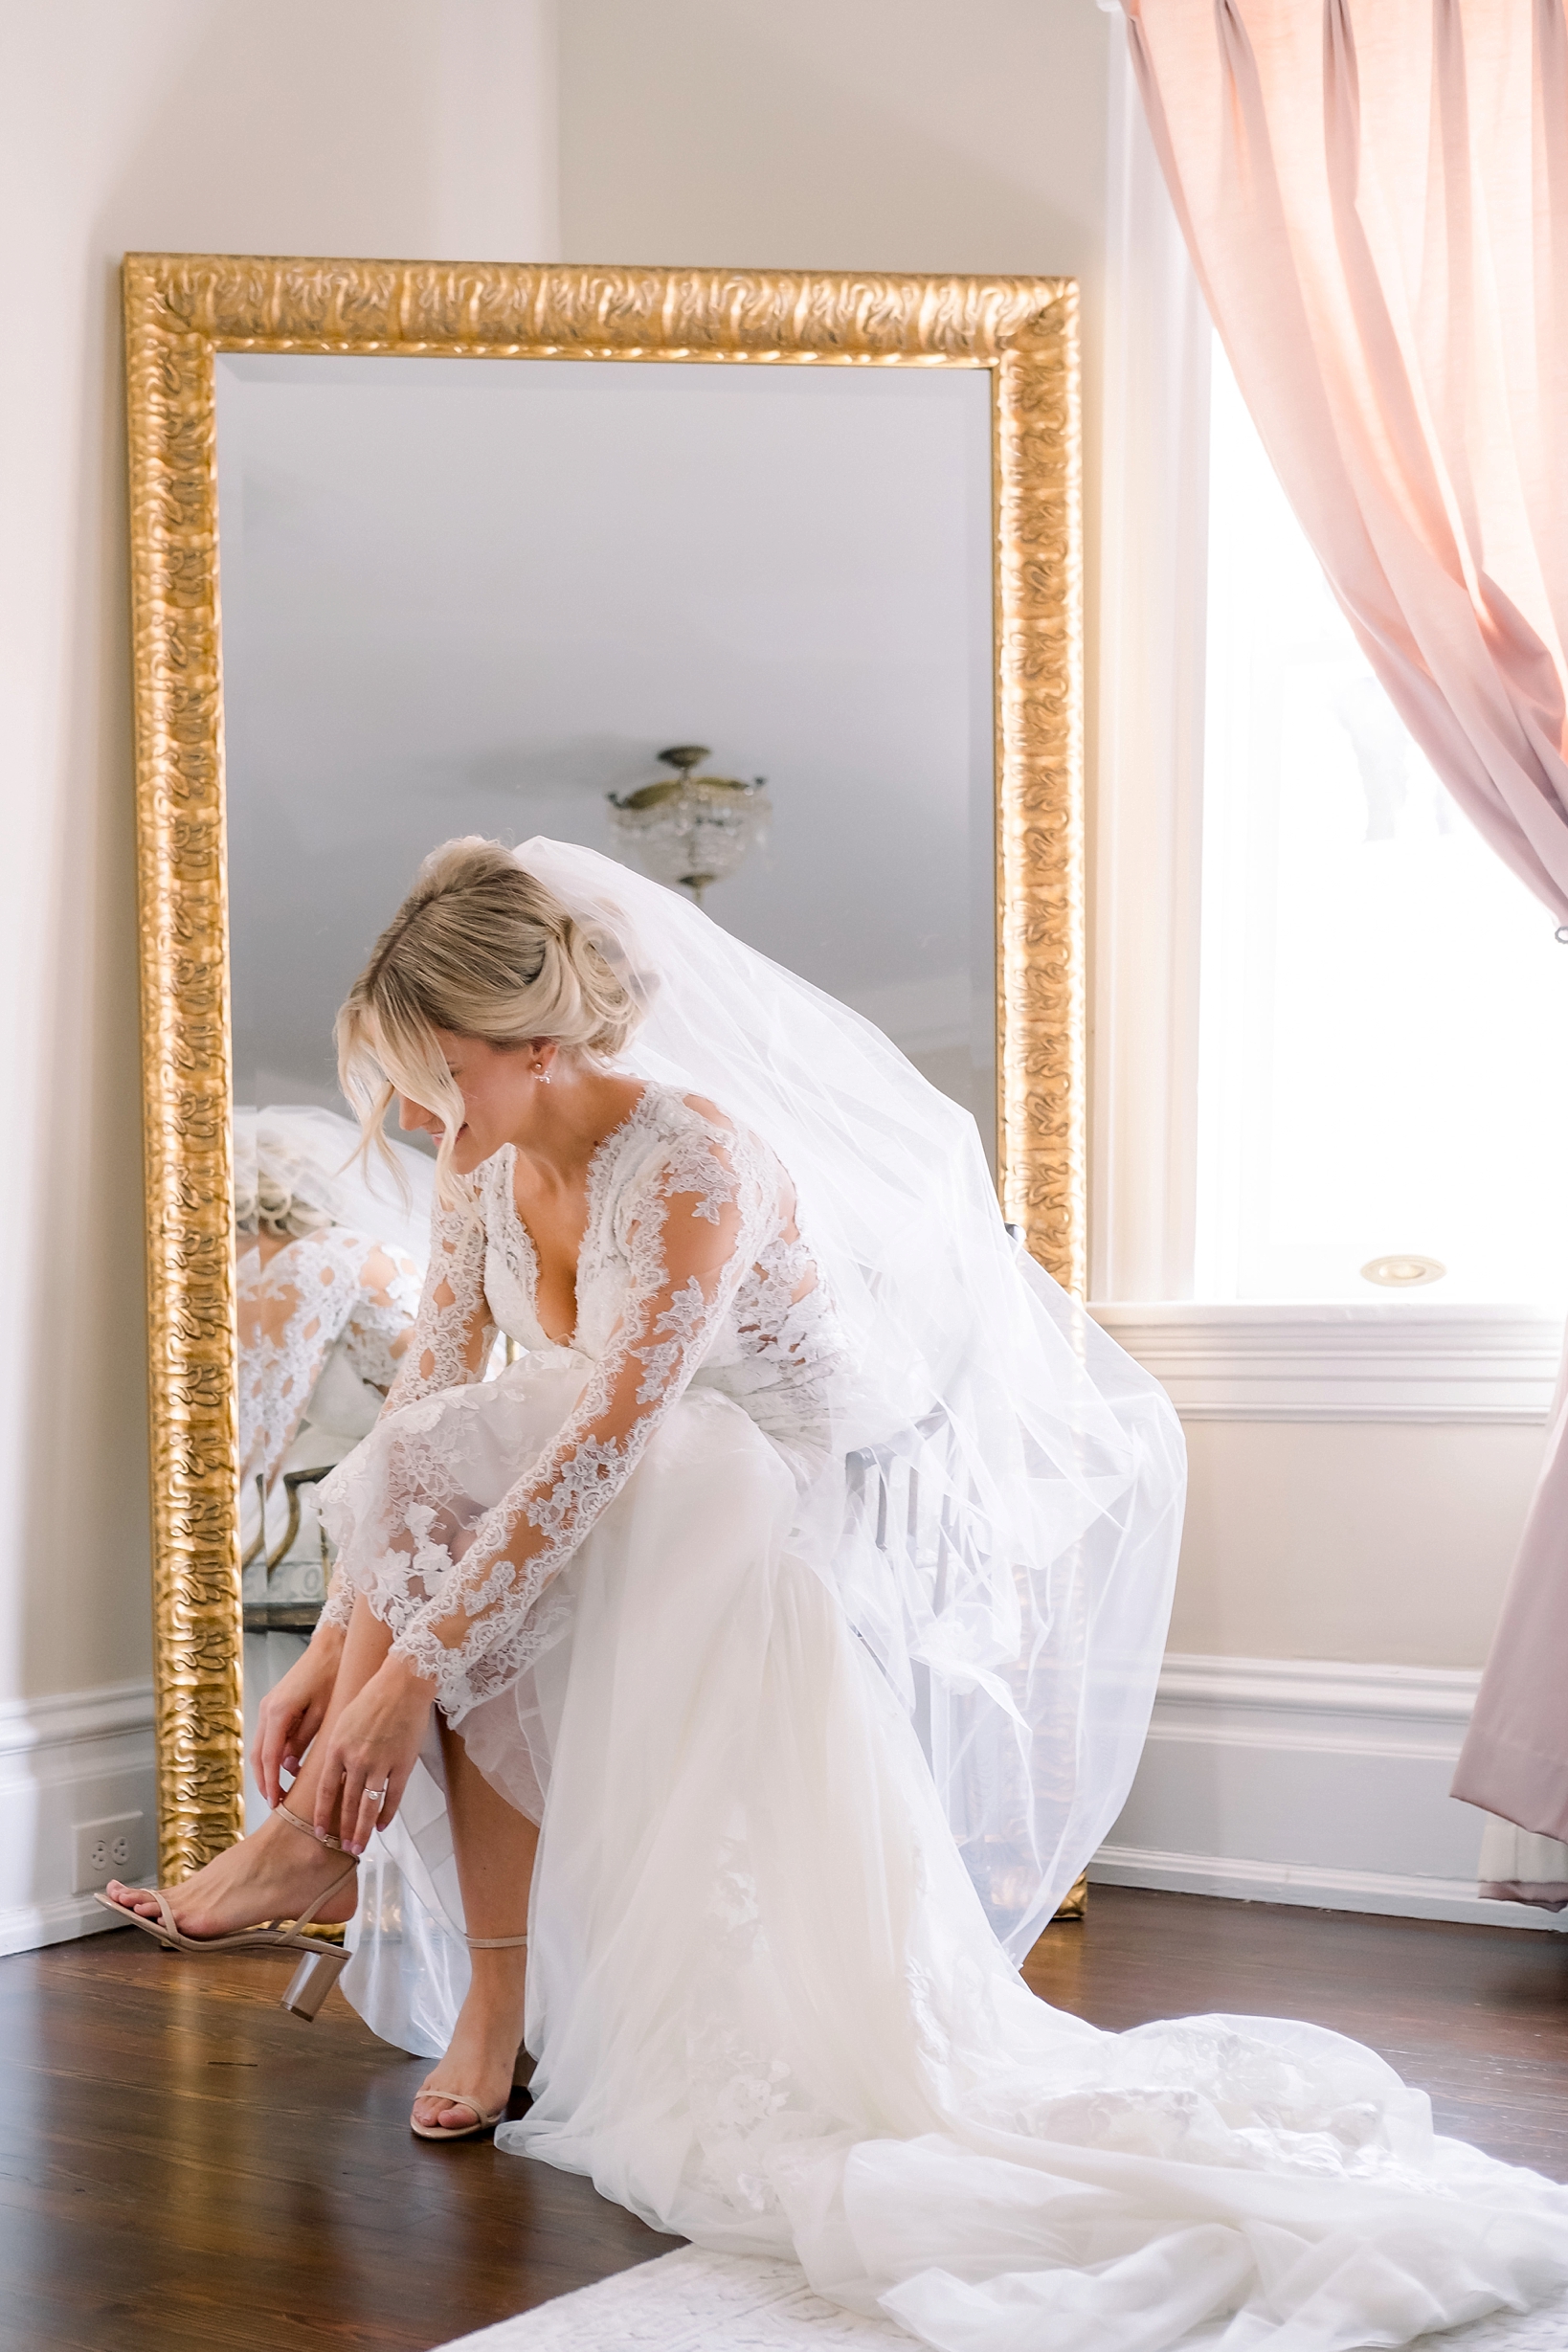 The bride getting into her heels in her bridal suite